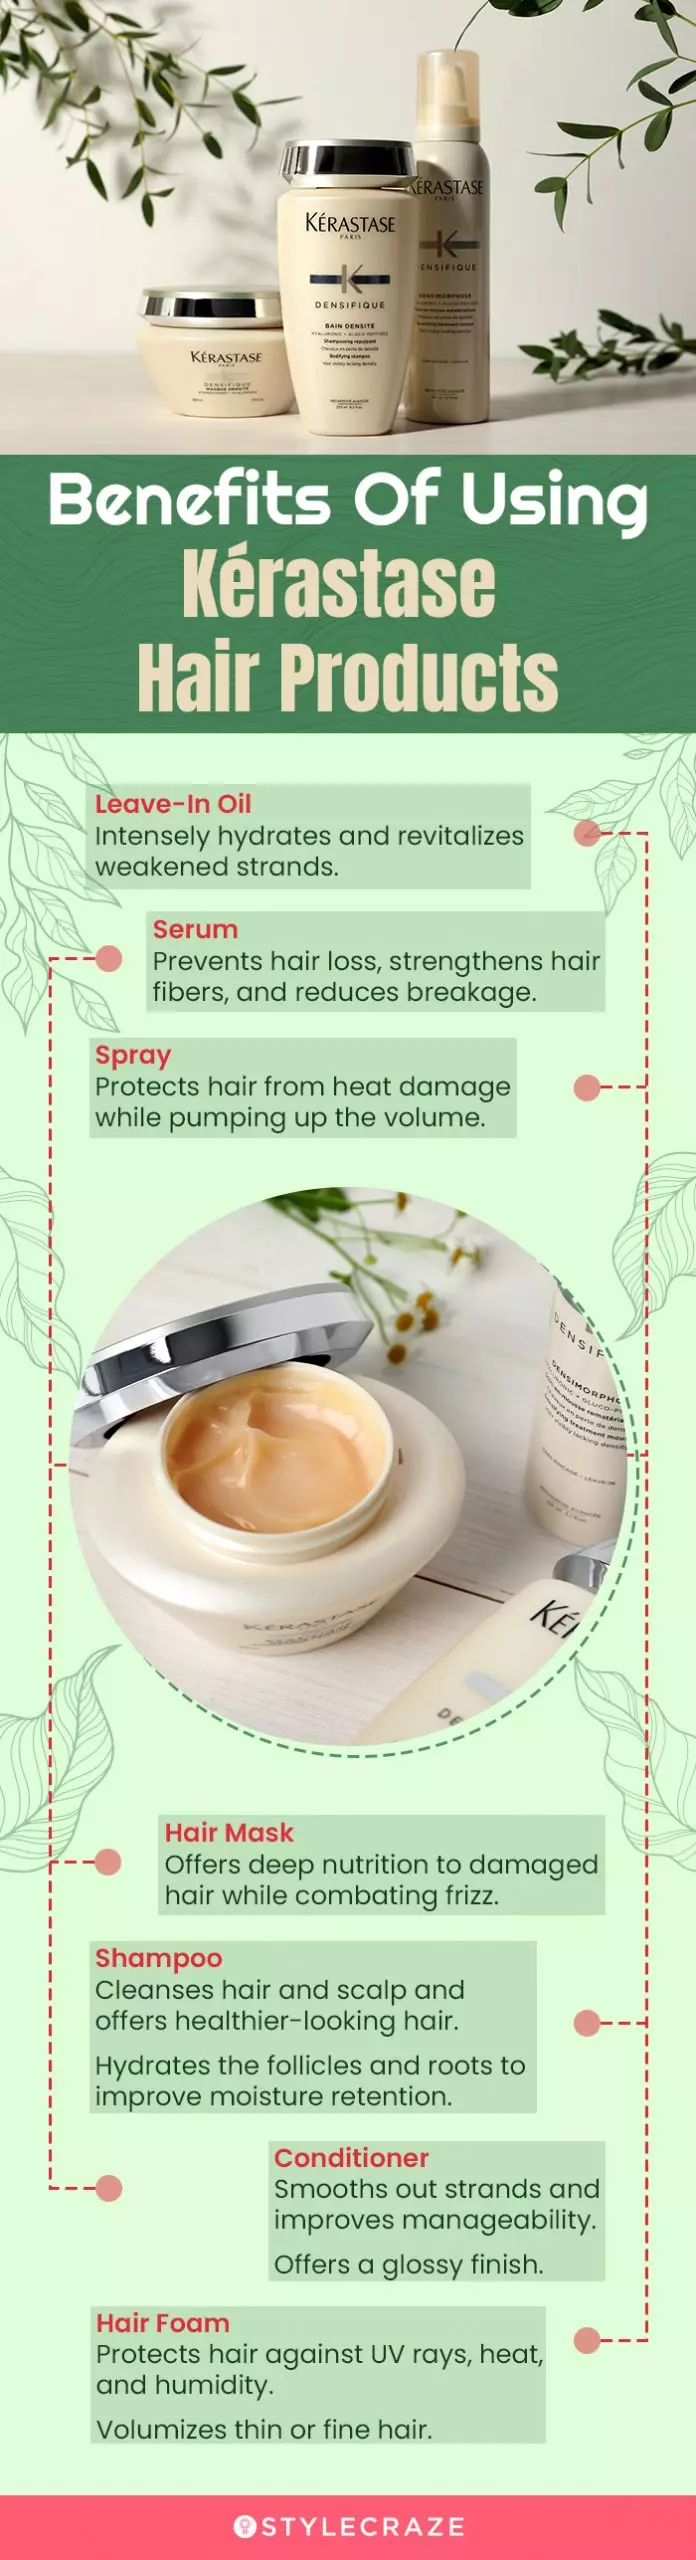 Benefits Of Using Kerastase Hair Products (infographic)